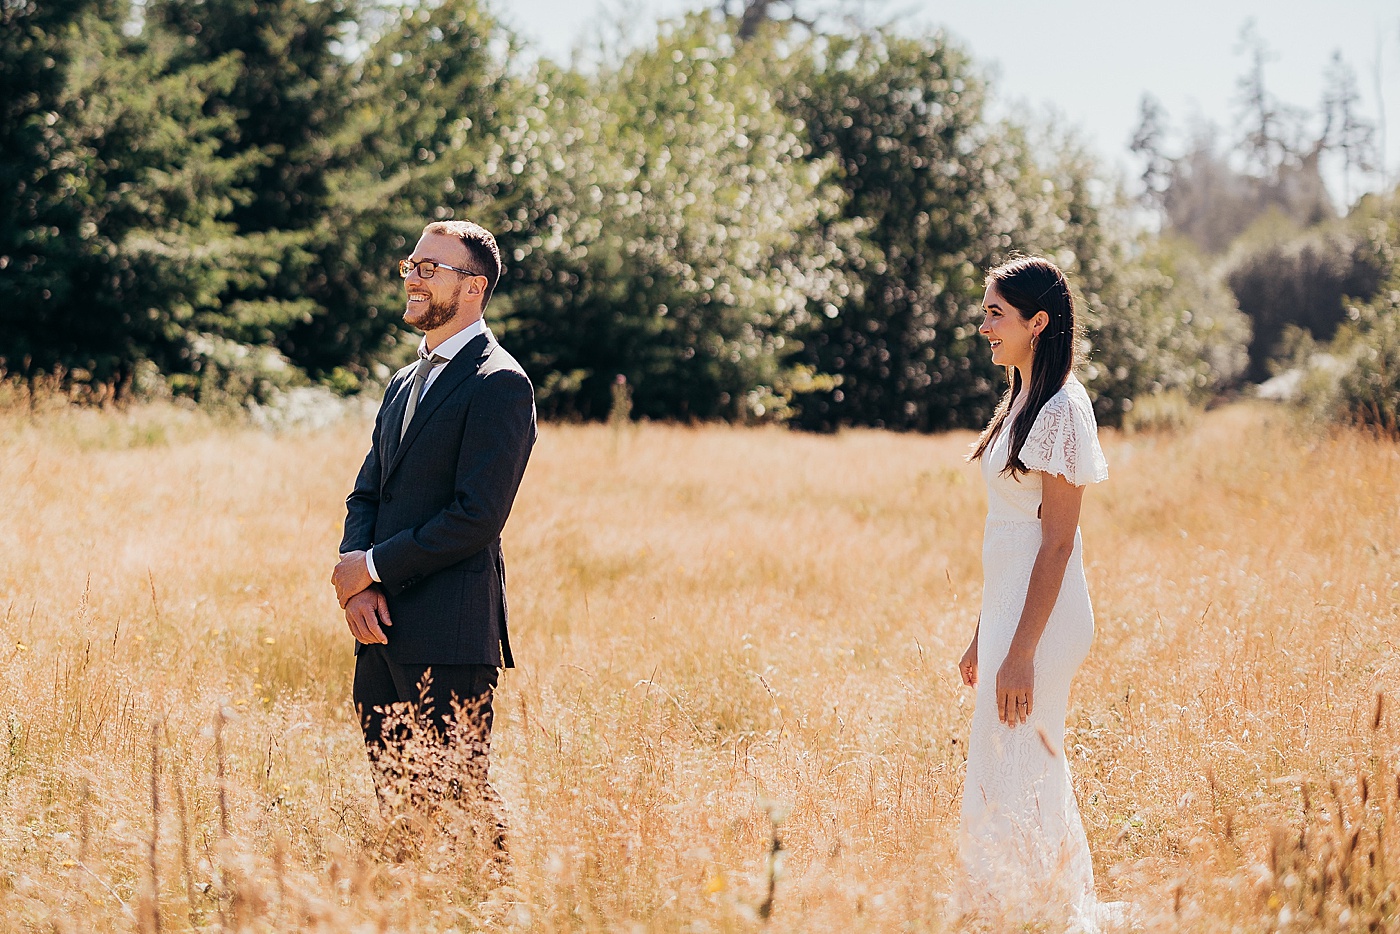 First look in field for bride and groom | Megan Montalvo Photography